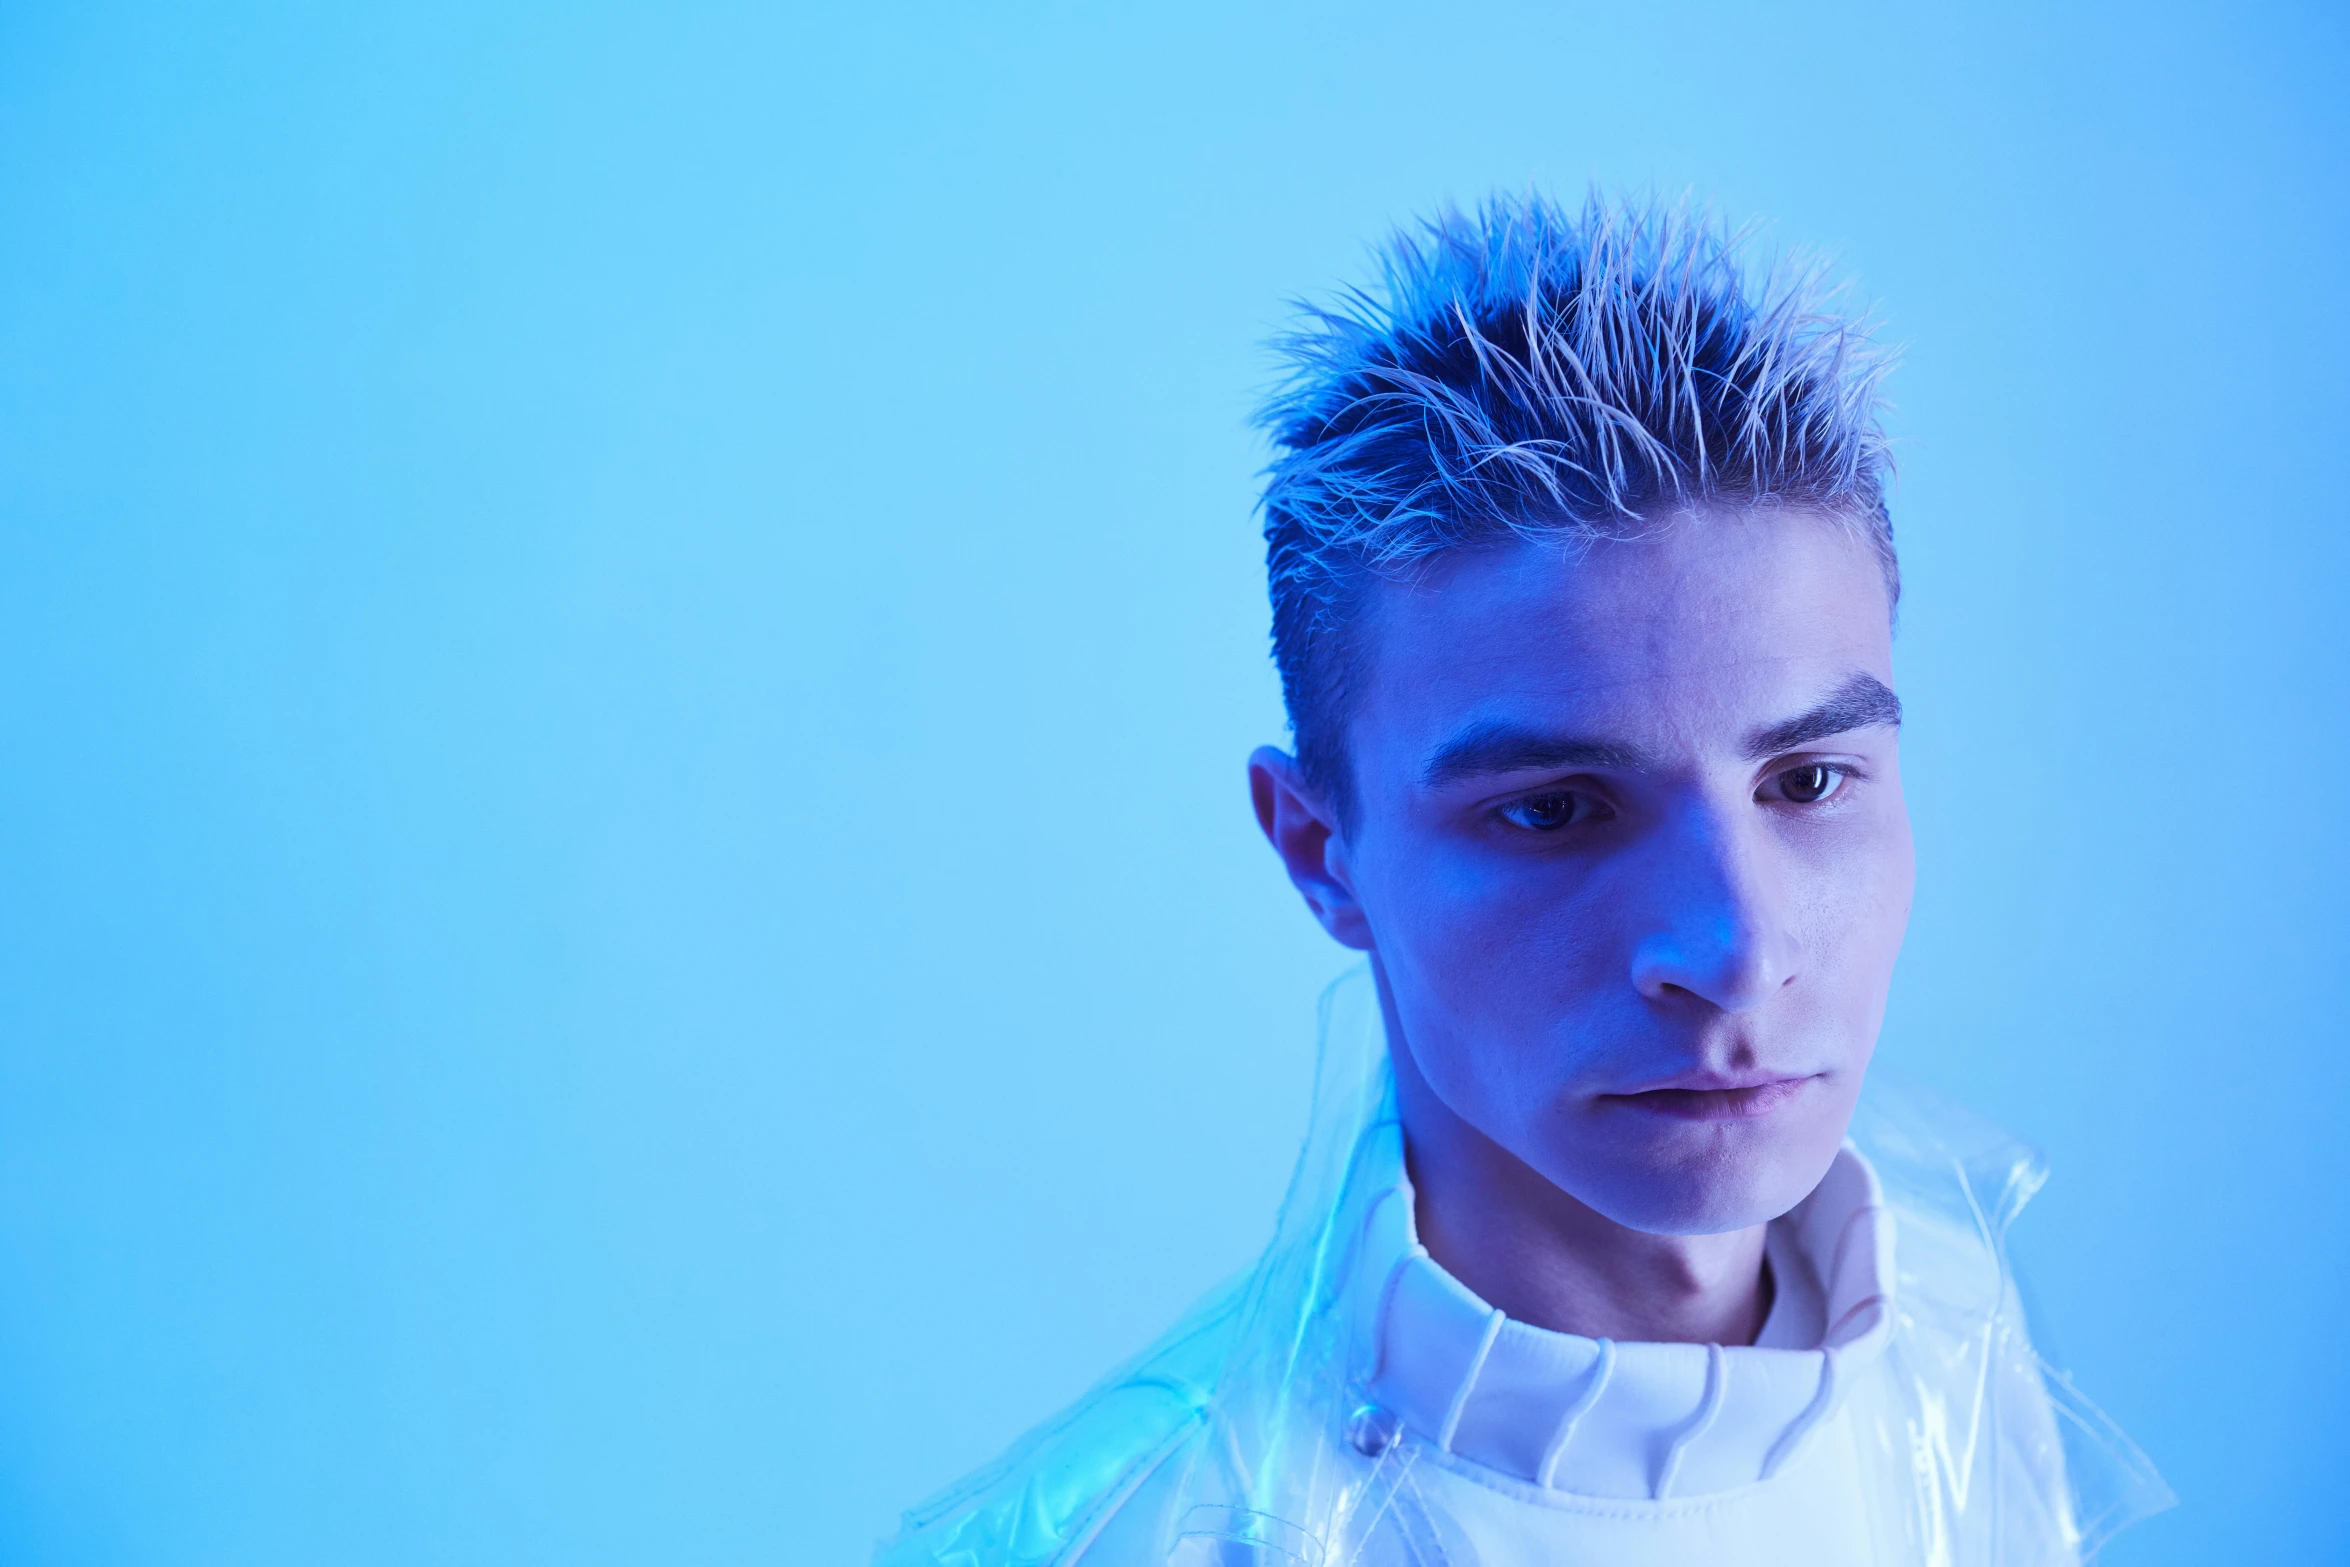 a man with spiky hair standing in front of a blue background, an album cover, inspired by Kristian Kreković, trending on pexels, antipodeans, white cyborg fashion shot, high blue lights, catalog photo, teenage boy